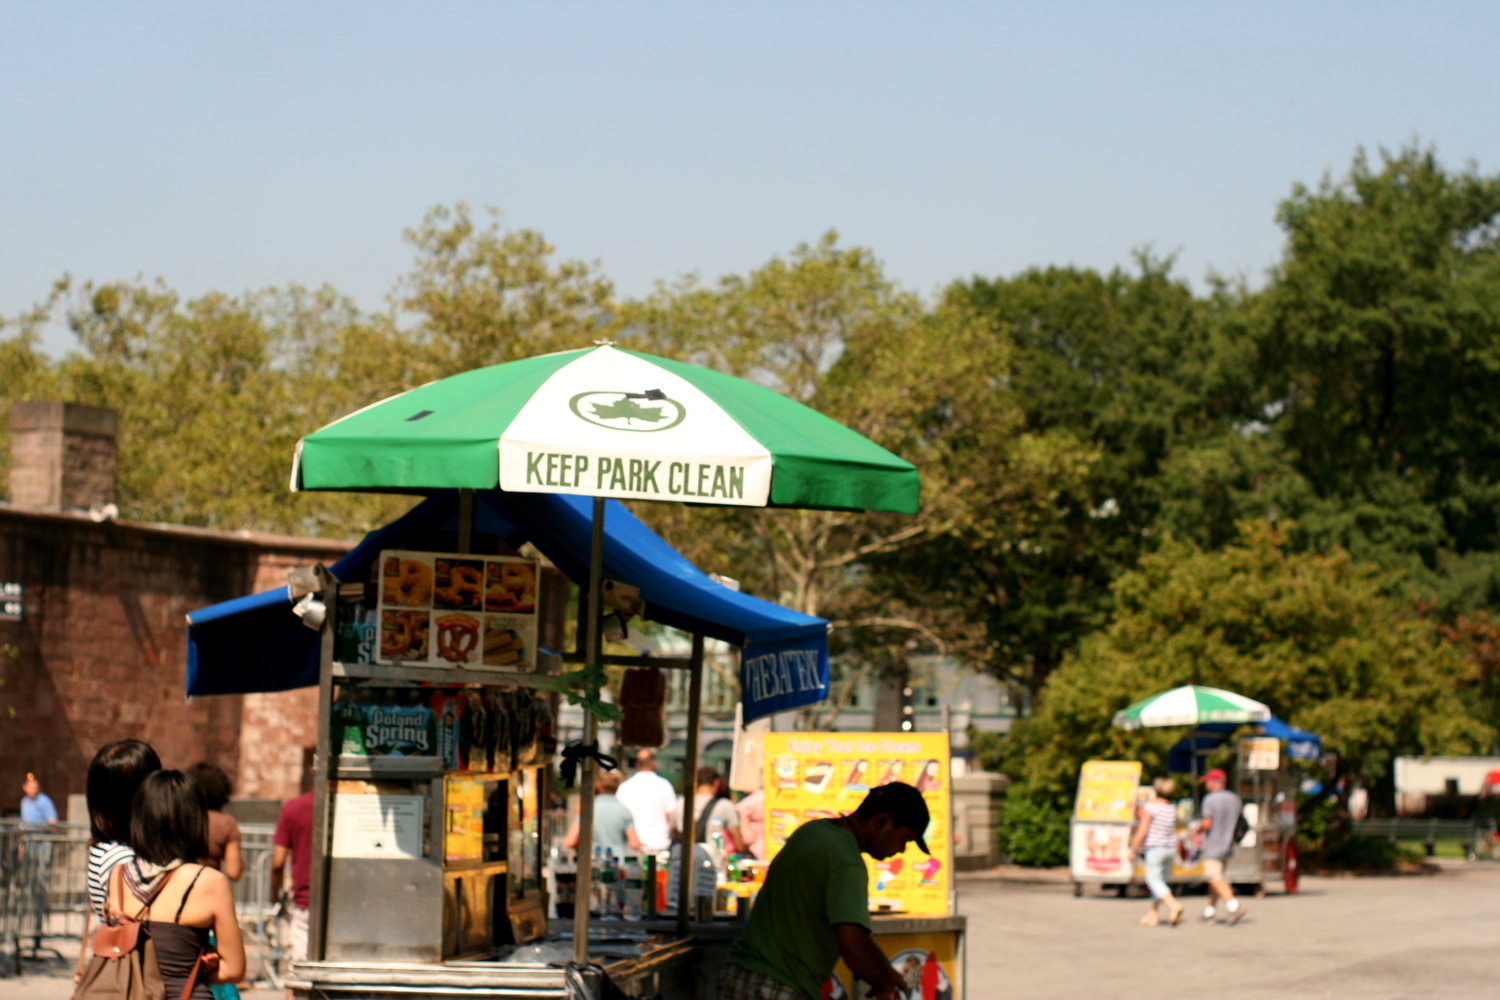 a man standing outside in front of a stand with a green umbrella over it